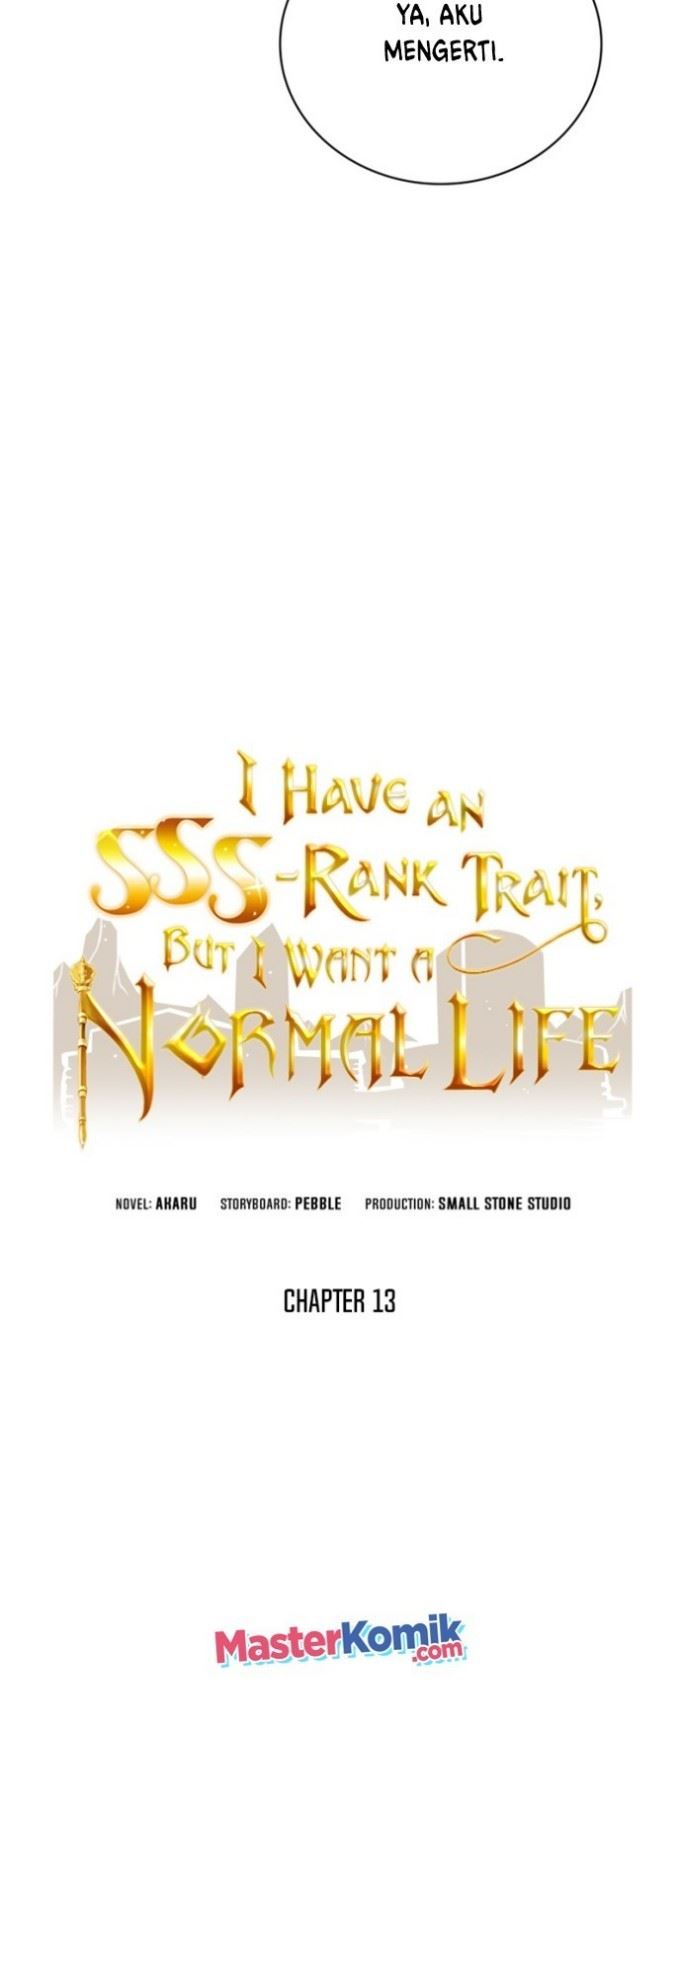 I have an SSS-rank Trait, but I want a Normal Life Chapter 13